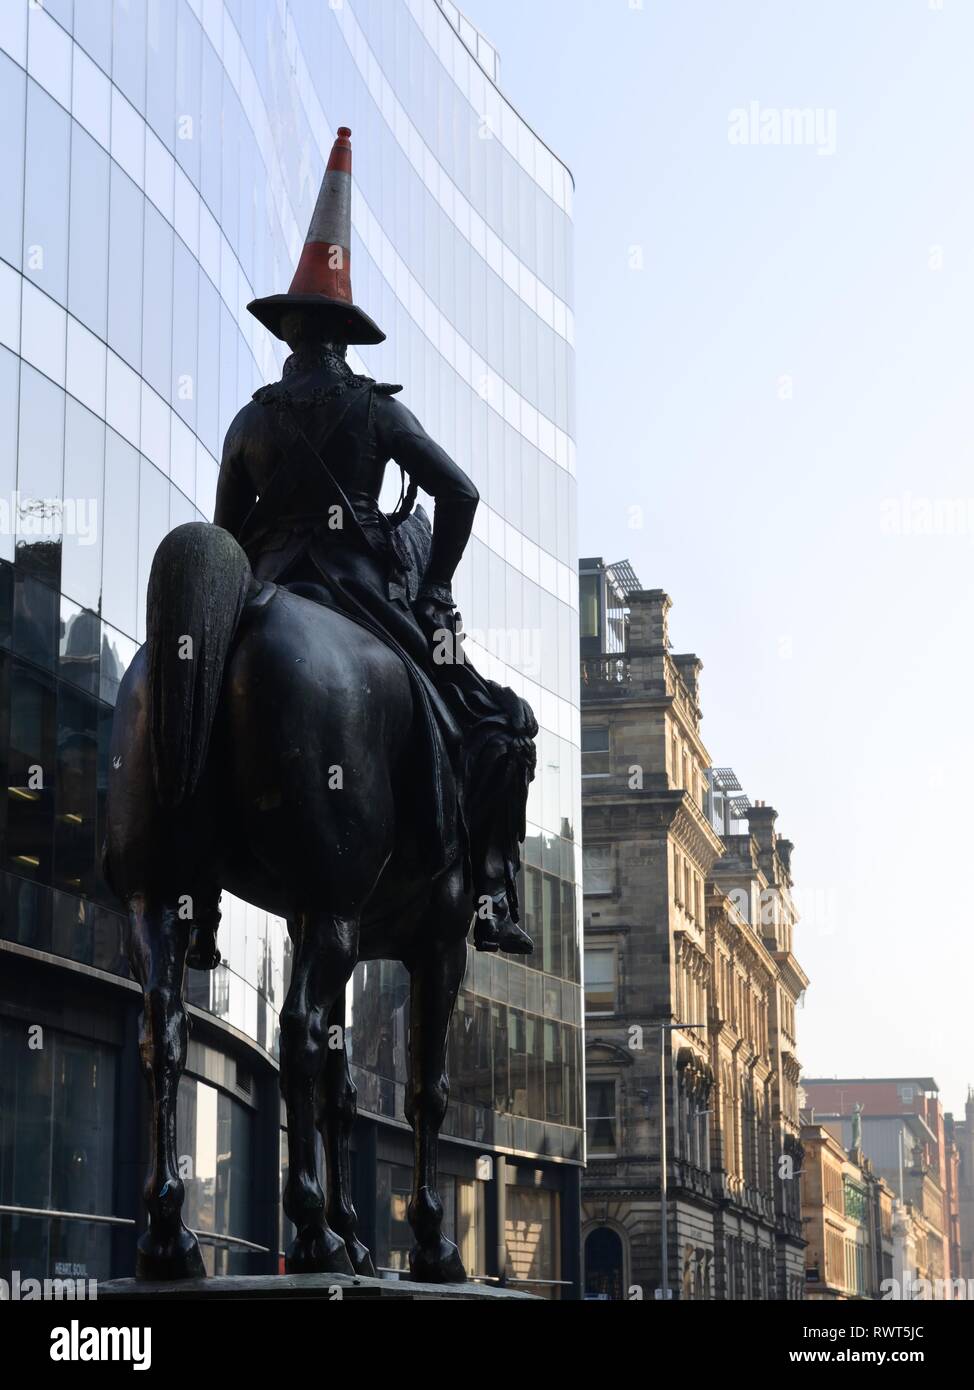 The renowned Duke of Wellington statue of horse and rider with the humorous addition of traffic cone on his head in Glasgow, Scotland, UK, Europe. Stock Photo